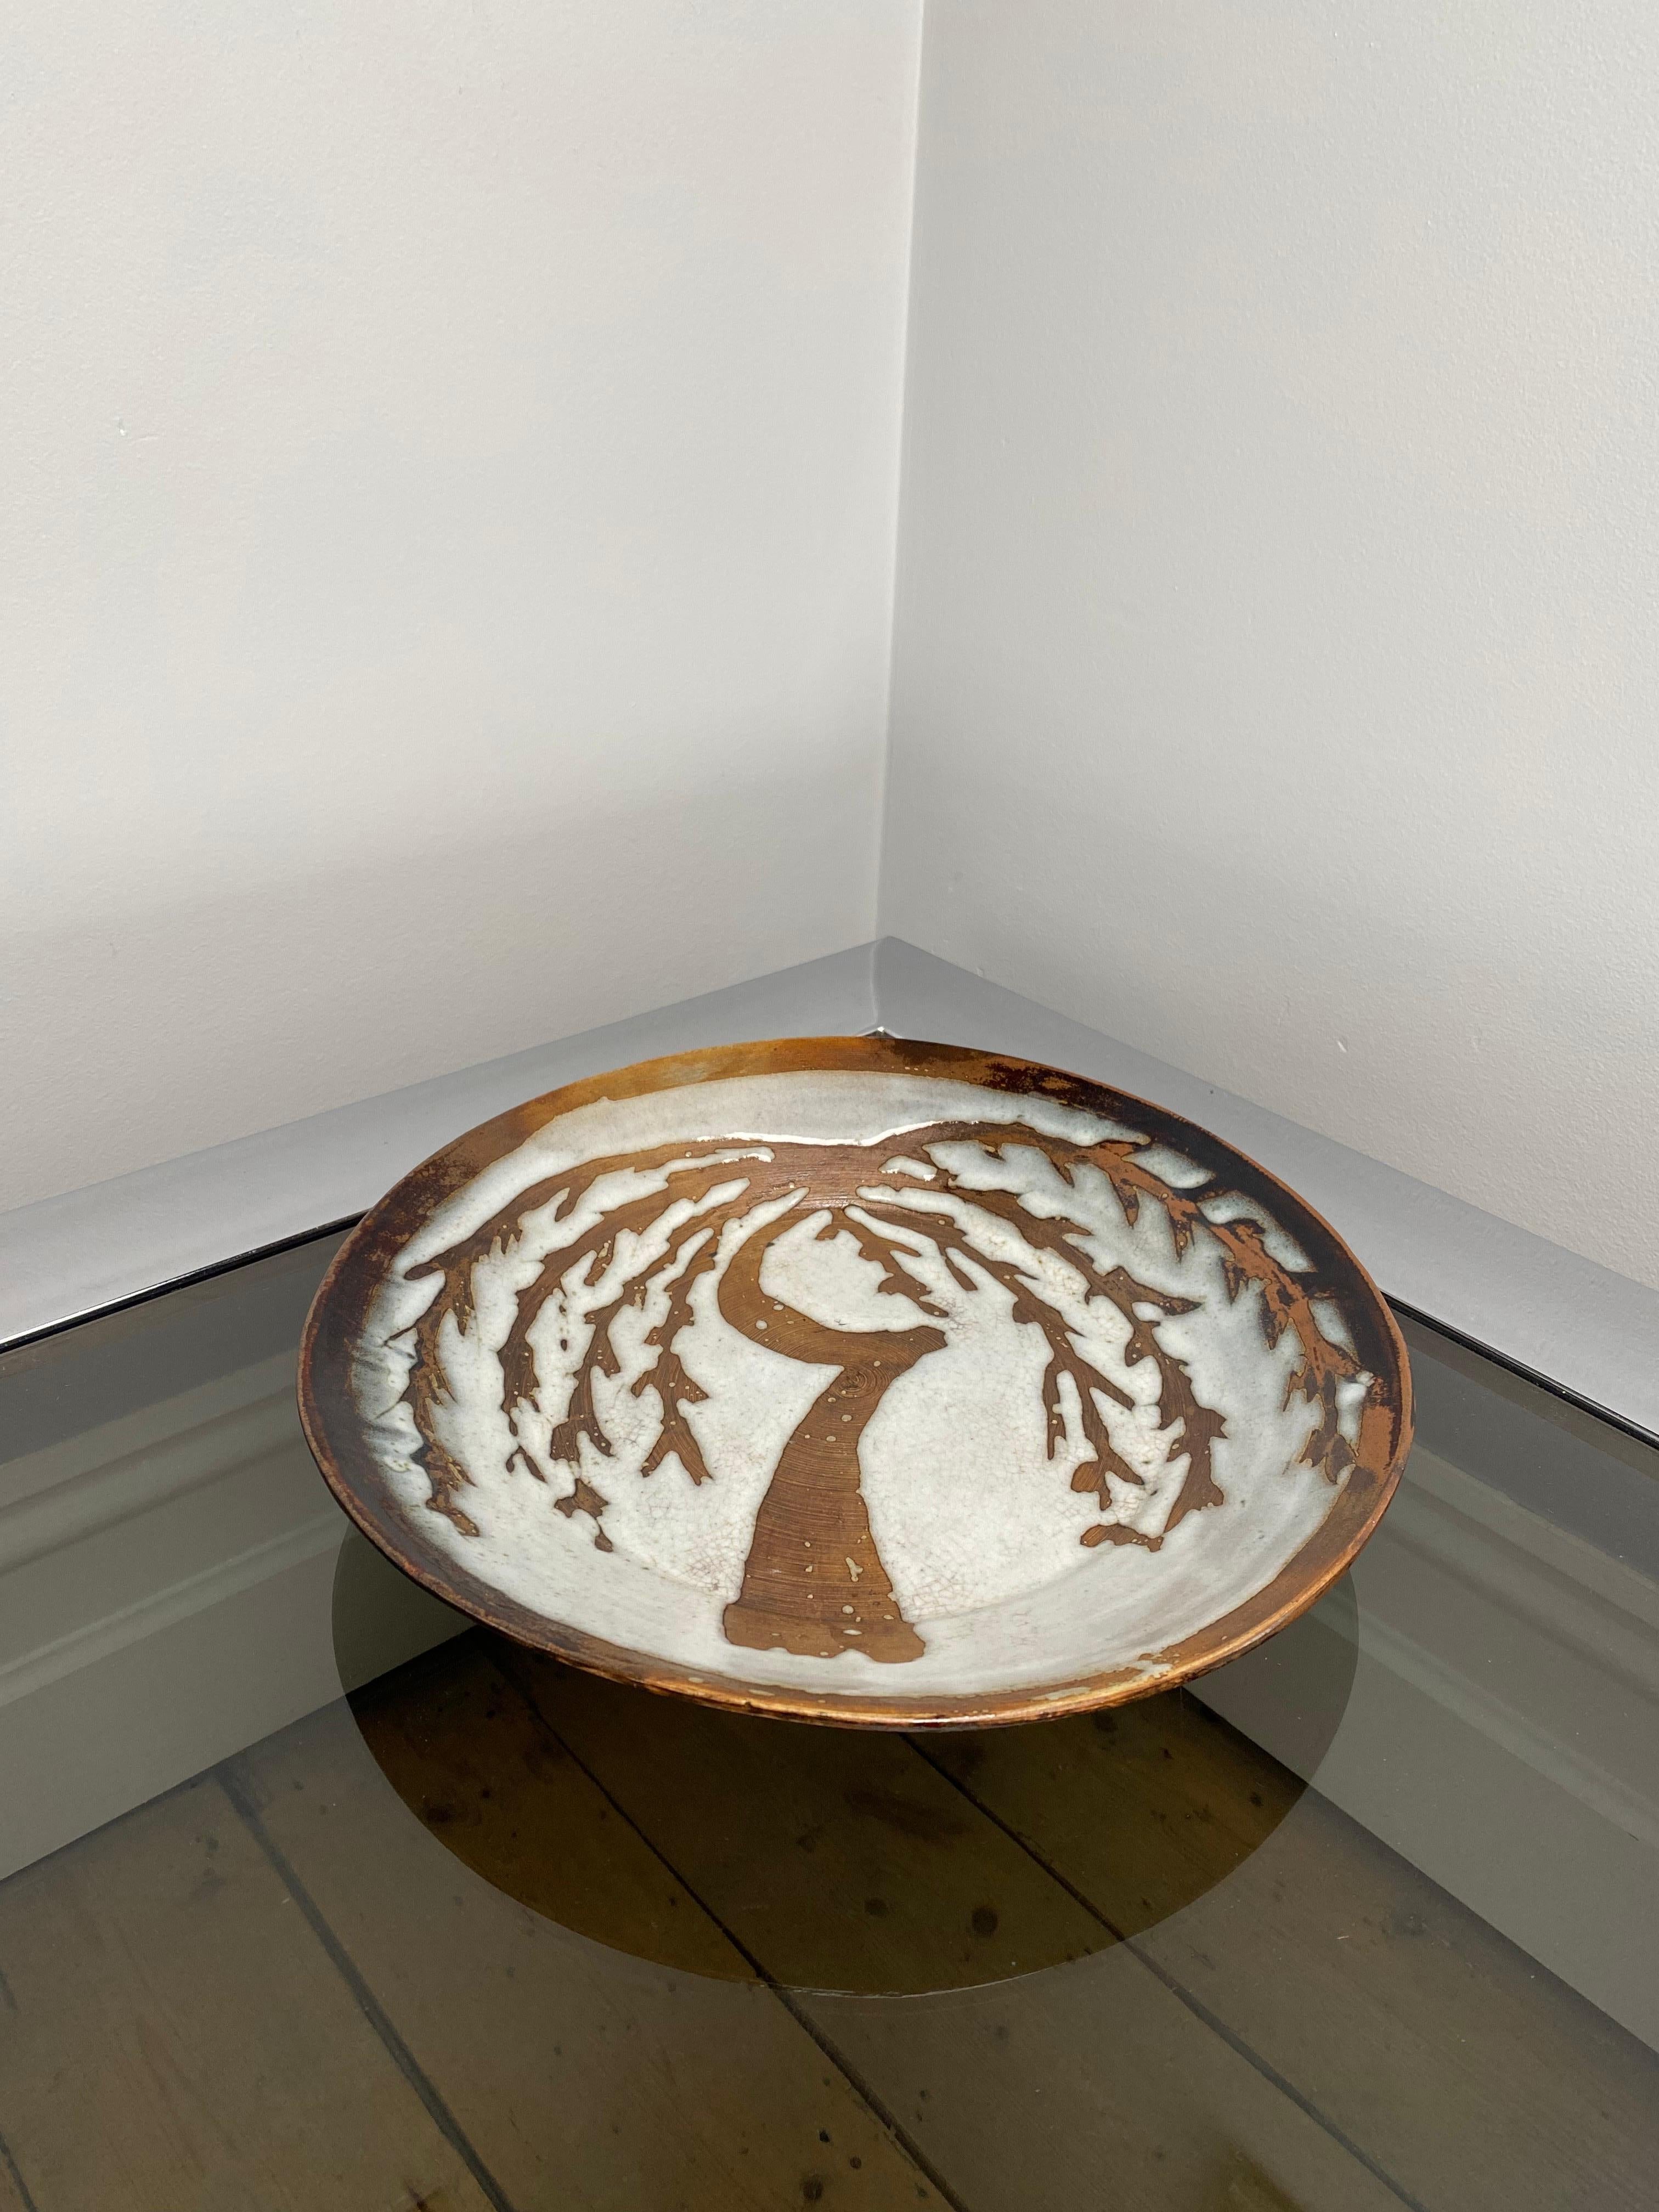 A very attractive bowl, plate or platter, dating to the 1970s. It has all the elements of a David Leach work - the willow motif, high quality earthenware, decorated using the wax resist method. It will make a lovely rustic styling item, to contrast